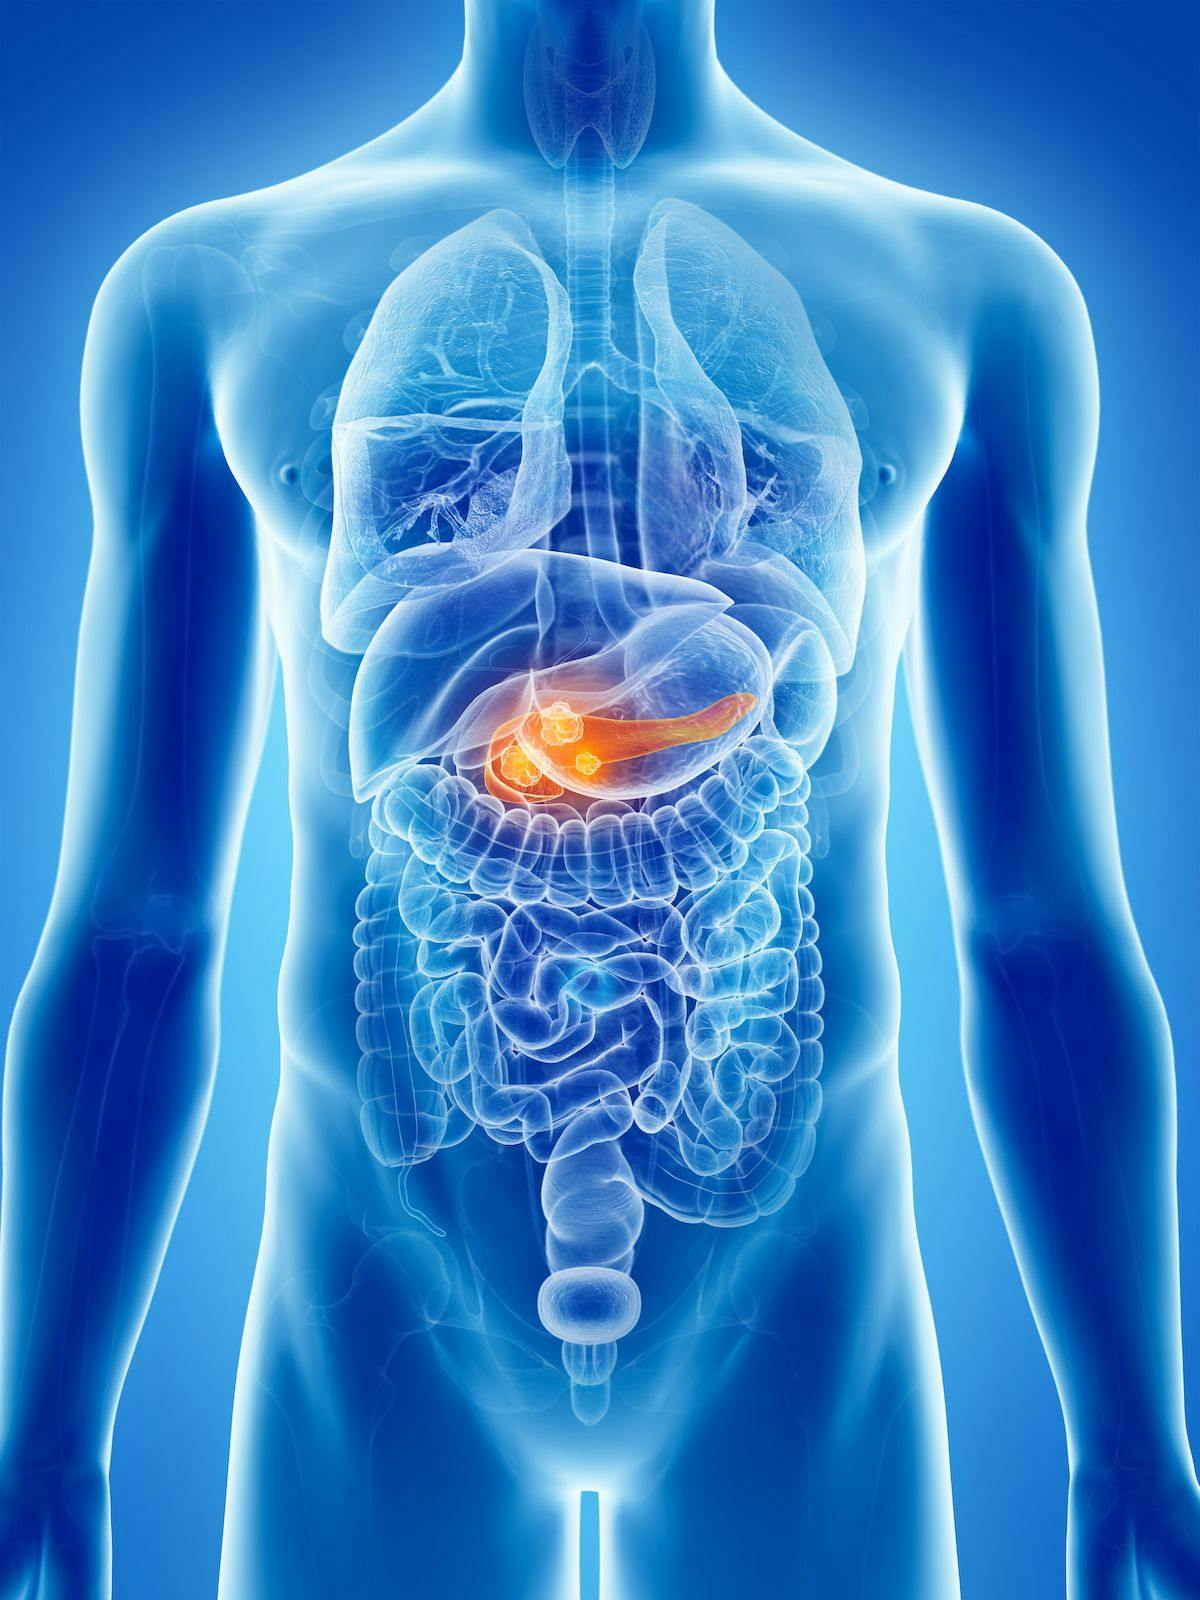 Results from the phase 2 CheckPAC trial indicated that stereotactic body radiotherapy plus nivolumab and ipilimumab produced a promising clinical benefit rate for patients with refractory metastatic pancreatic cancer. 